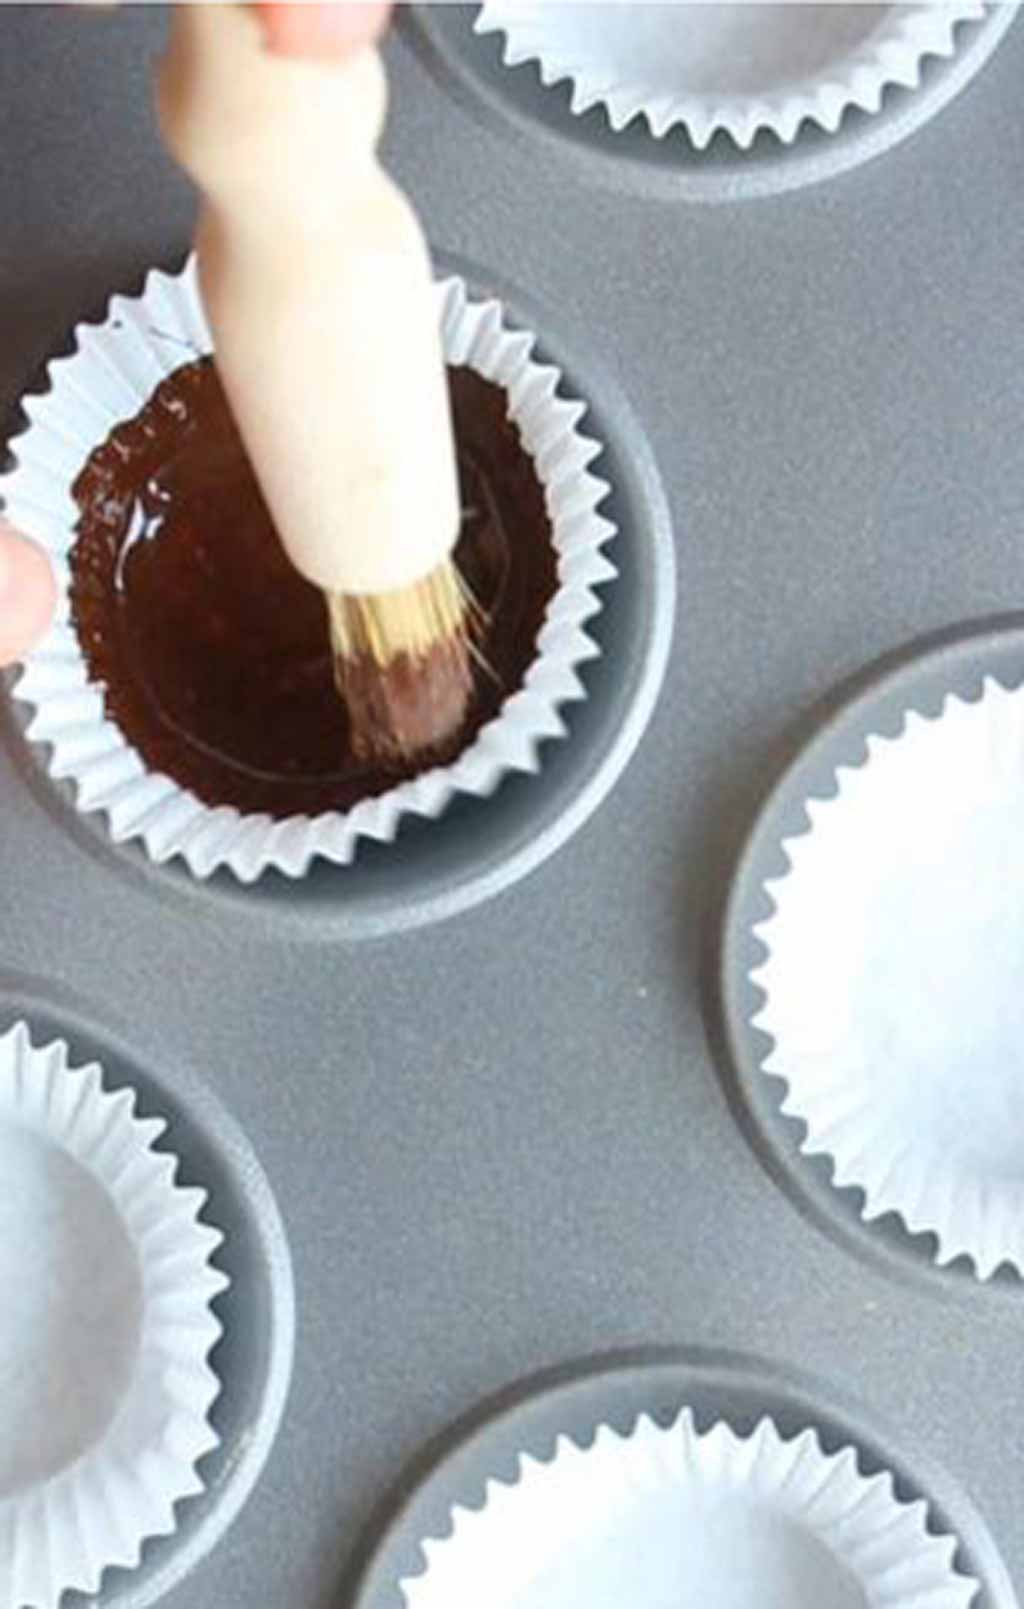 Painting Chocolate Onto The Paper Case With A Pastry Brush